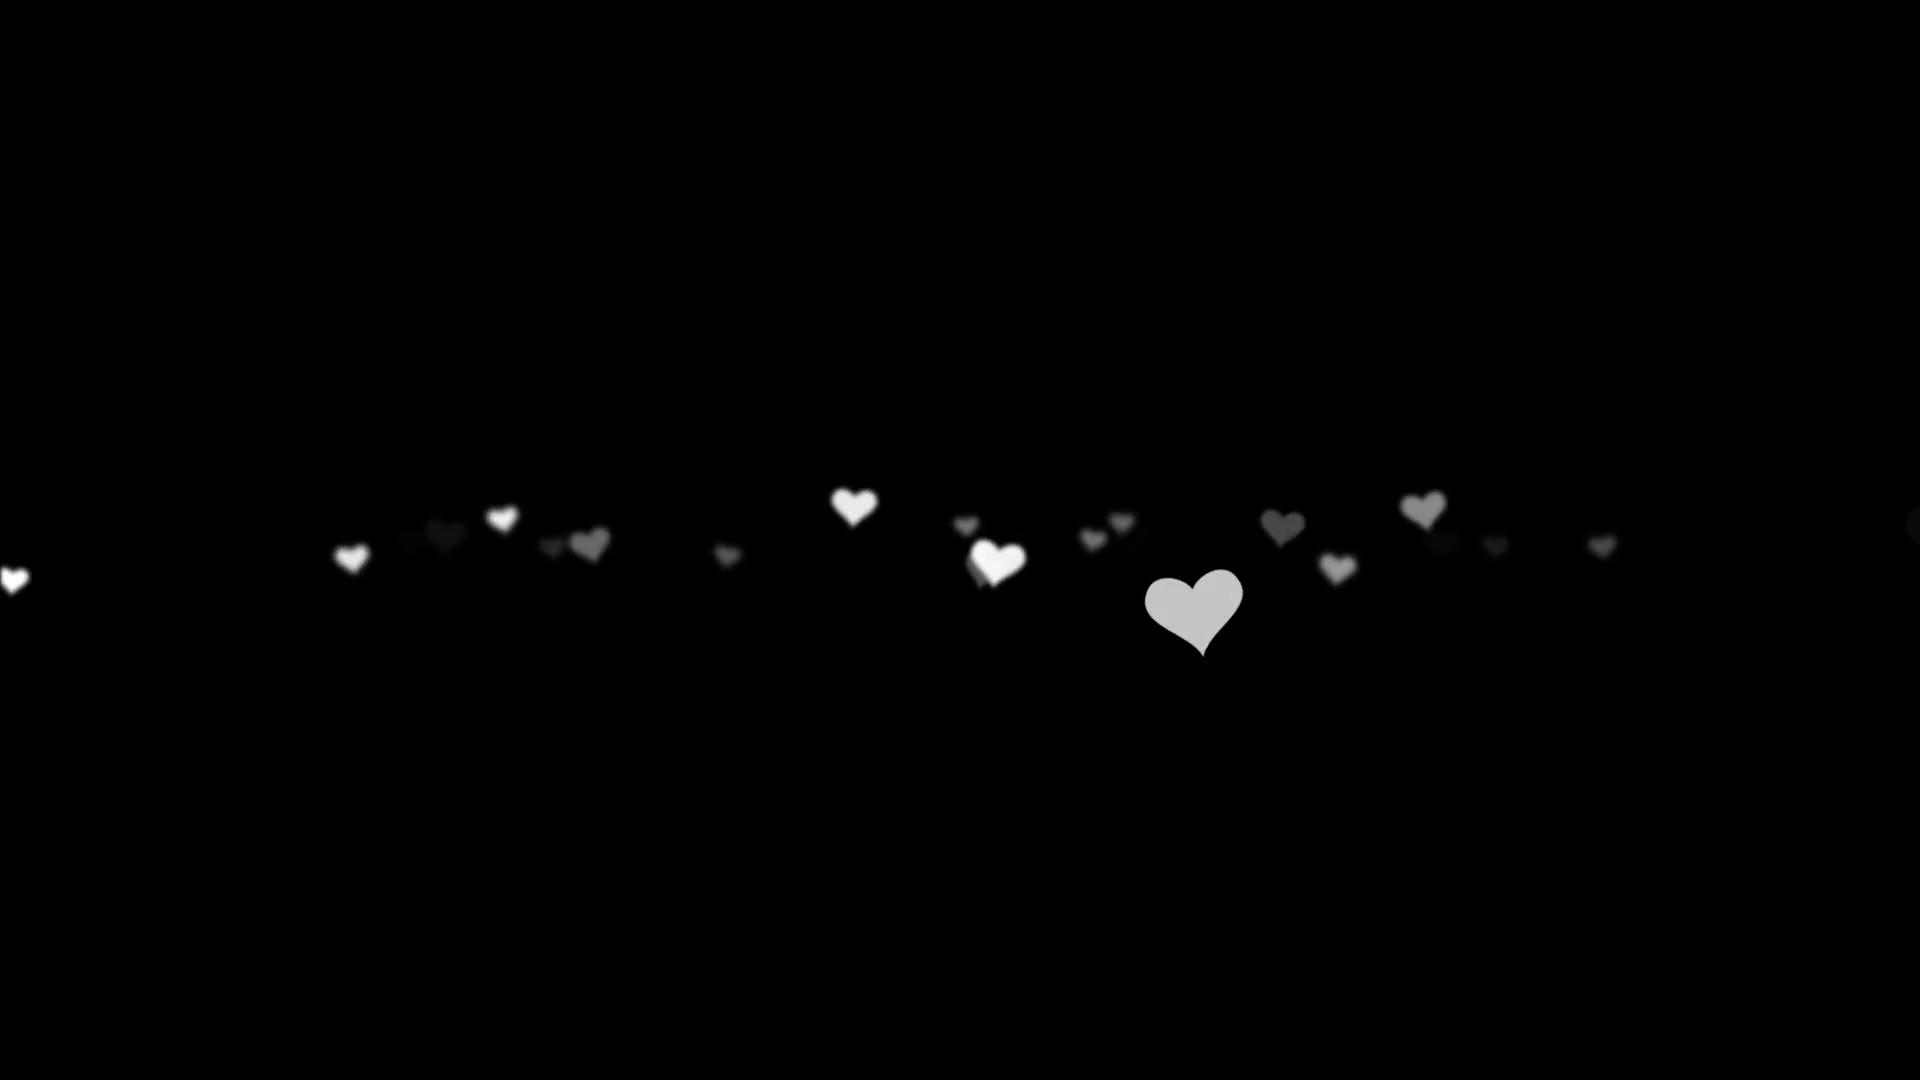 Black and White Hearts Background